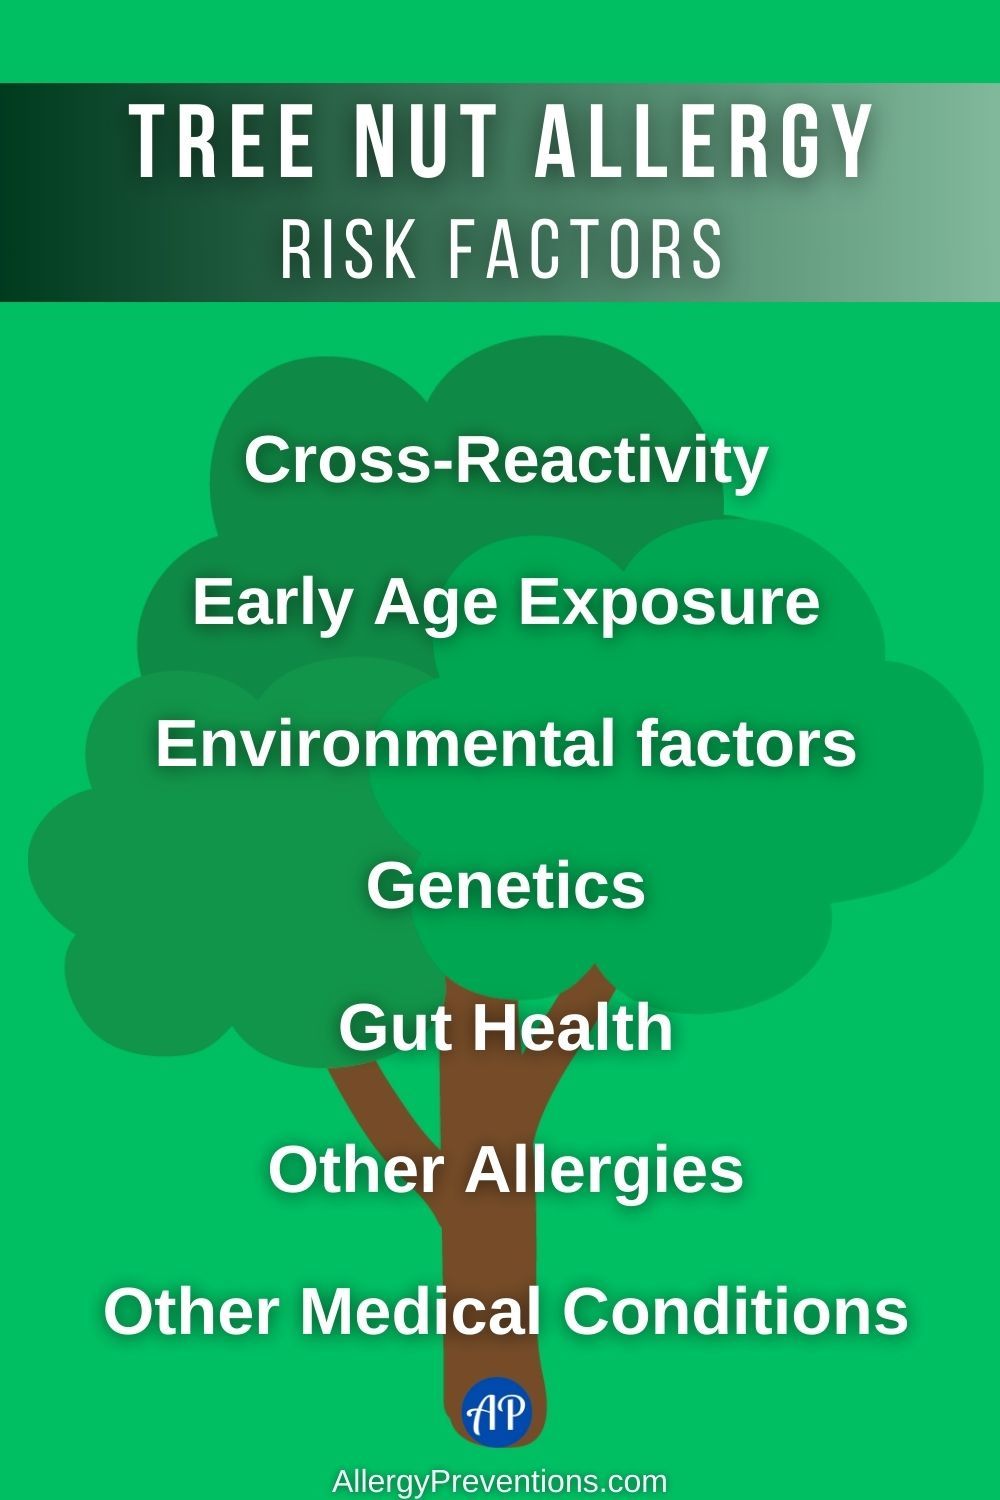 Tree nut allergy risk factors infographic. Risk factors include: Cross-reactivity, early age exposure, environmental factors, genetics, gut health, other allergies, other medical conditions.